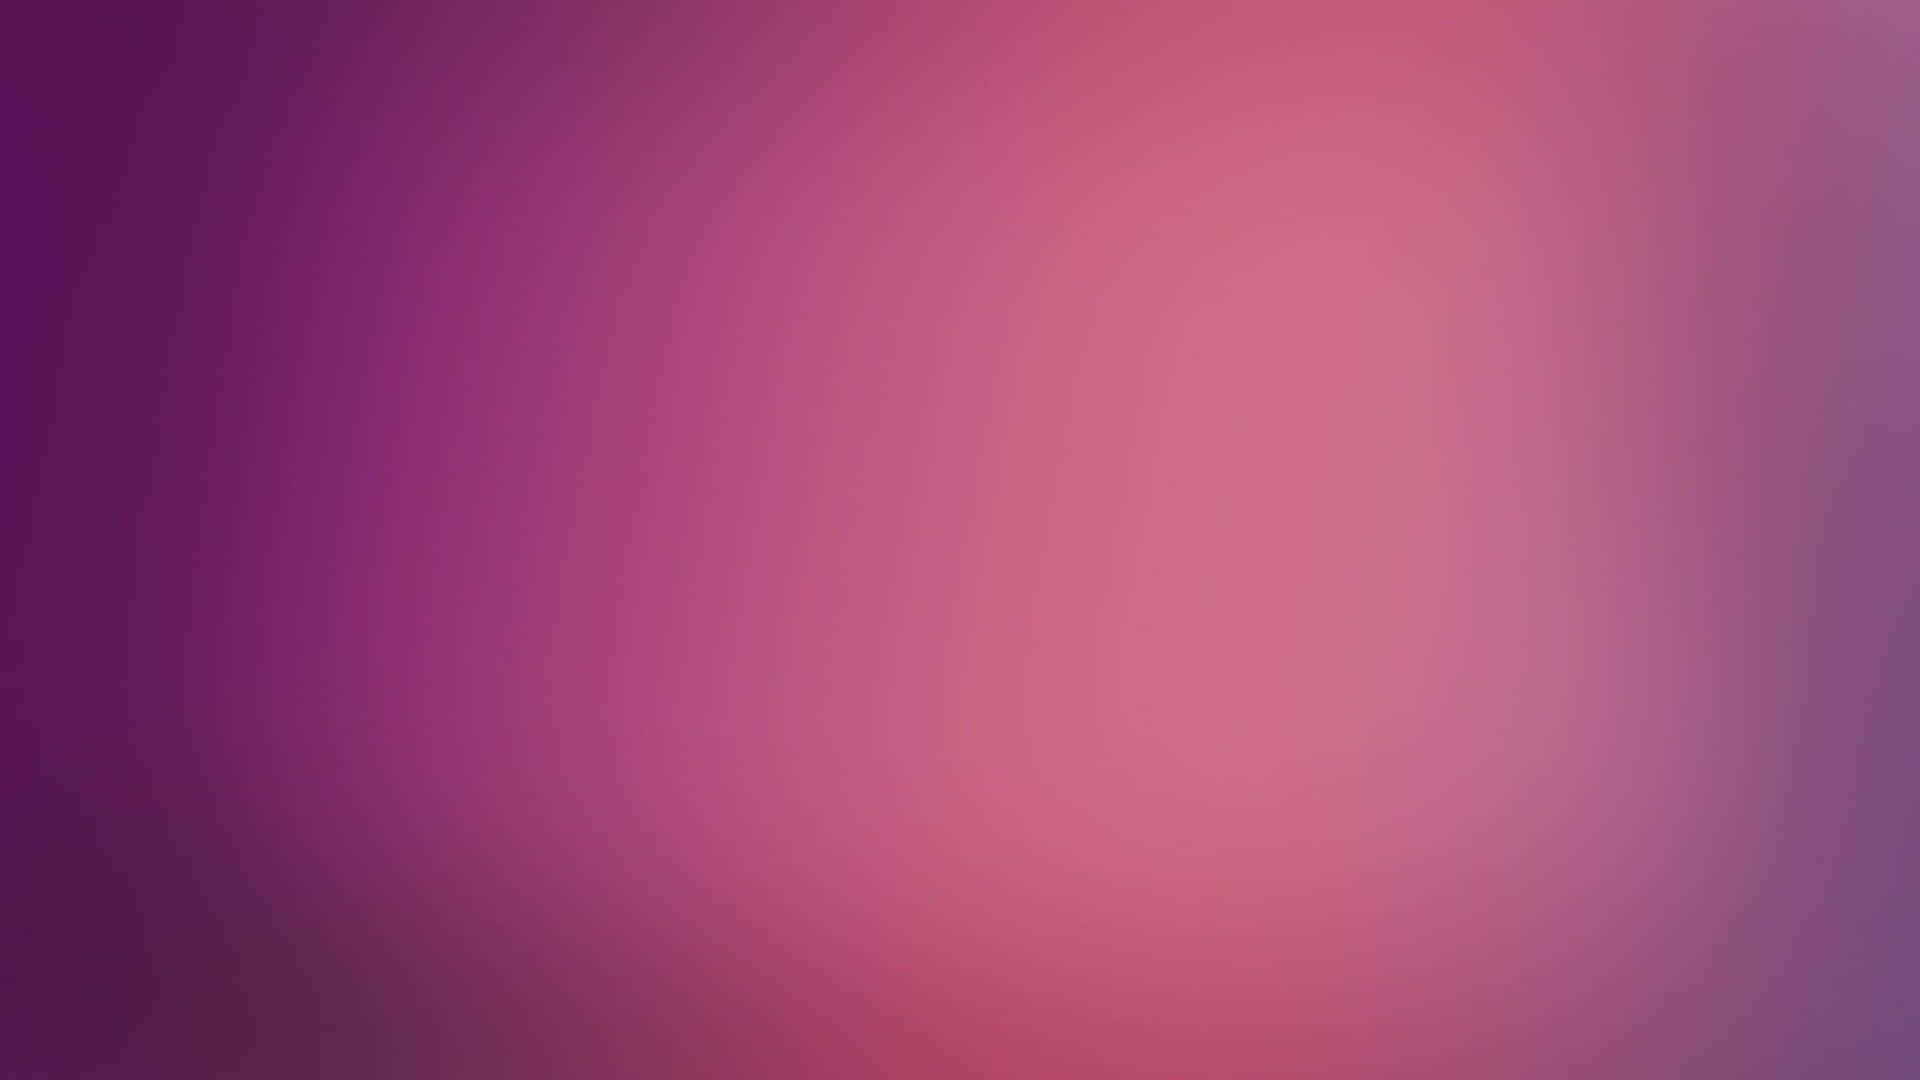 Gradient Solid Purple And Pink Wallpaper